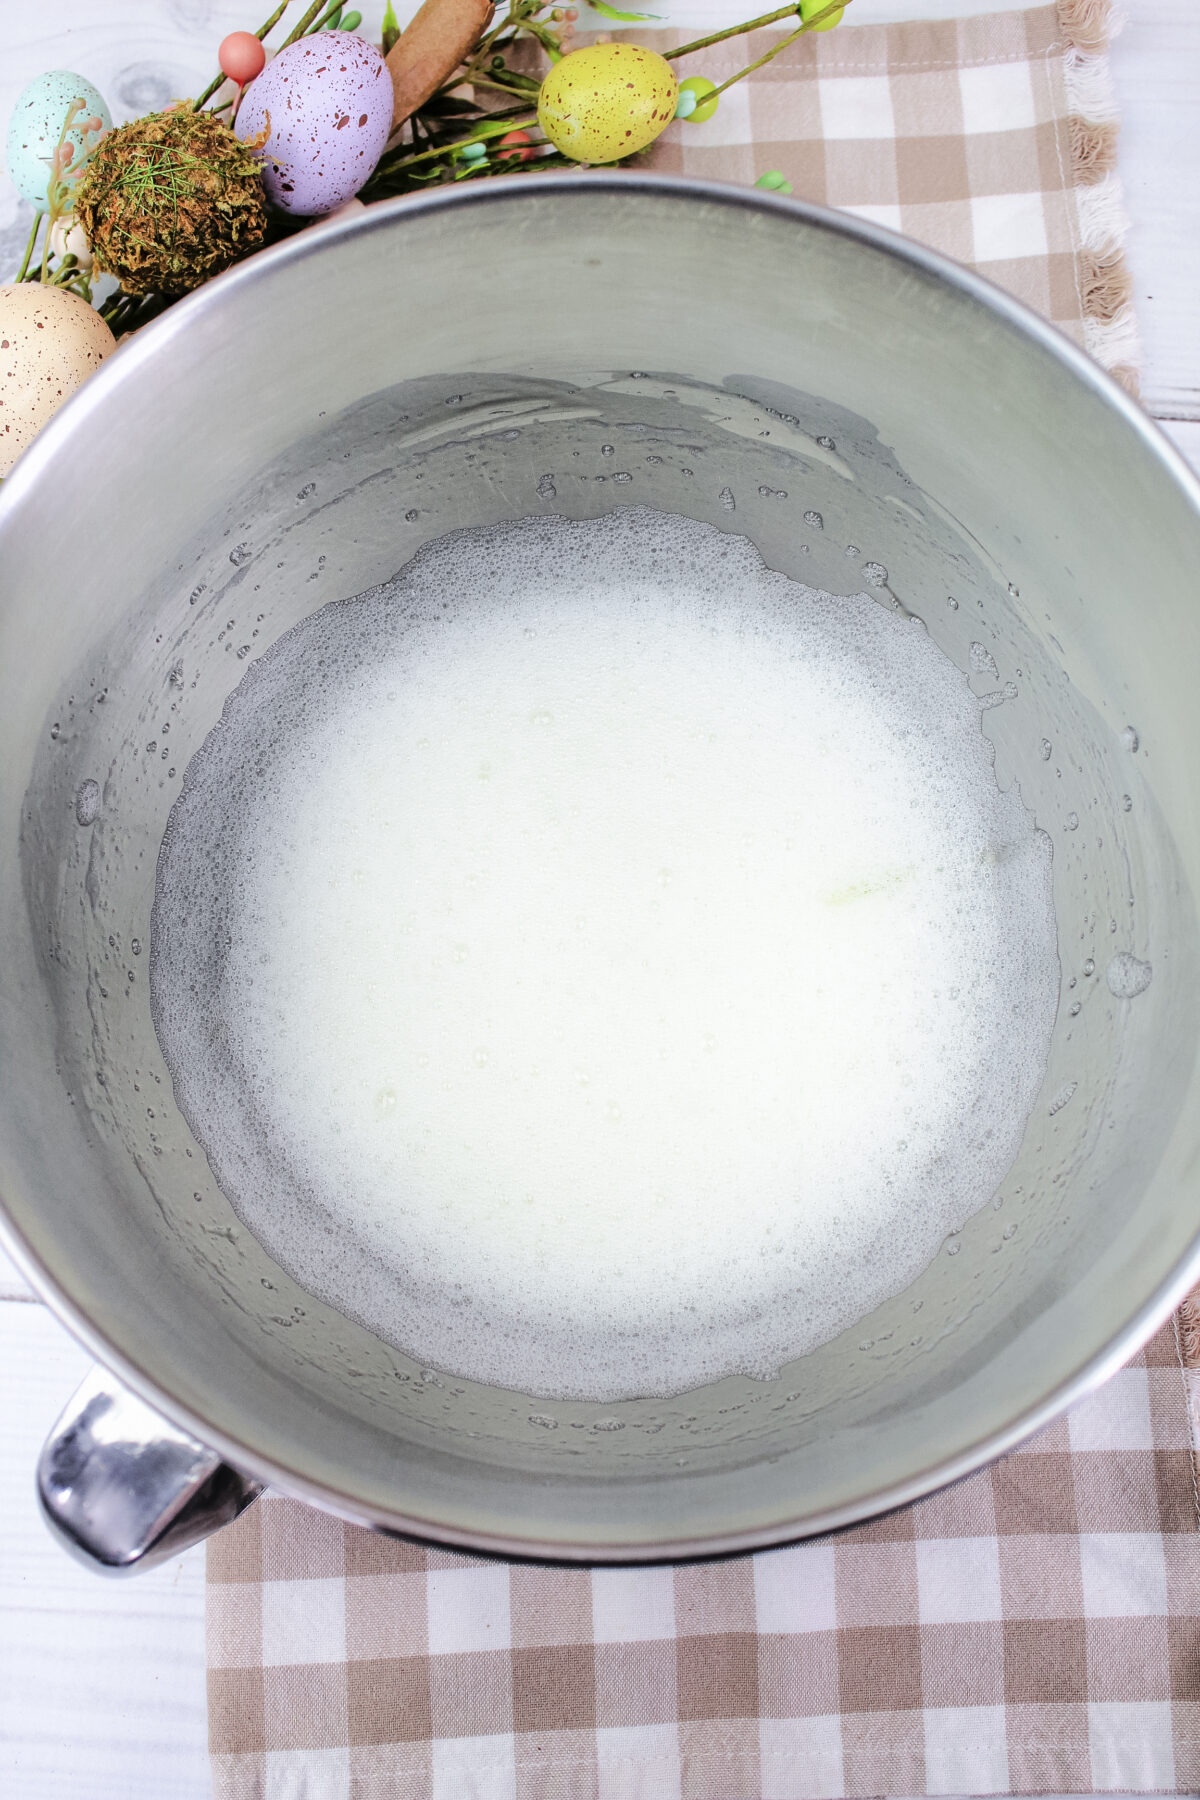 Foamy egg whites in a mixing bowl.